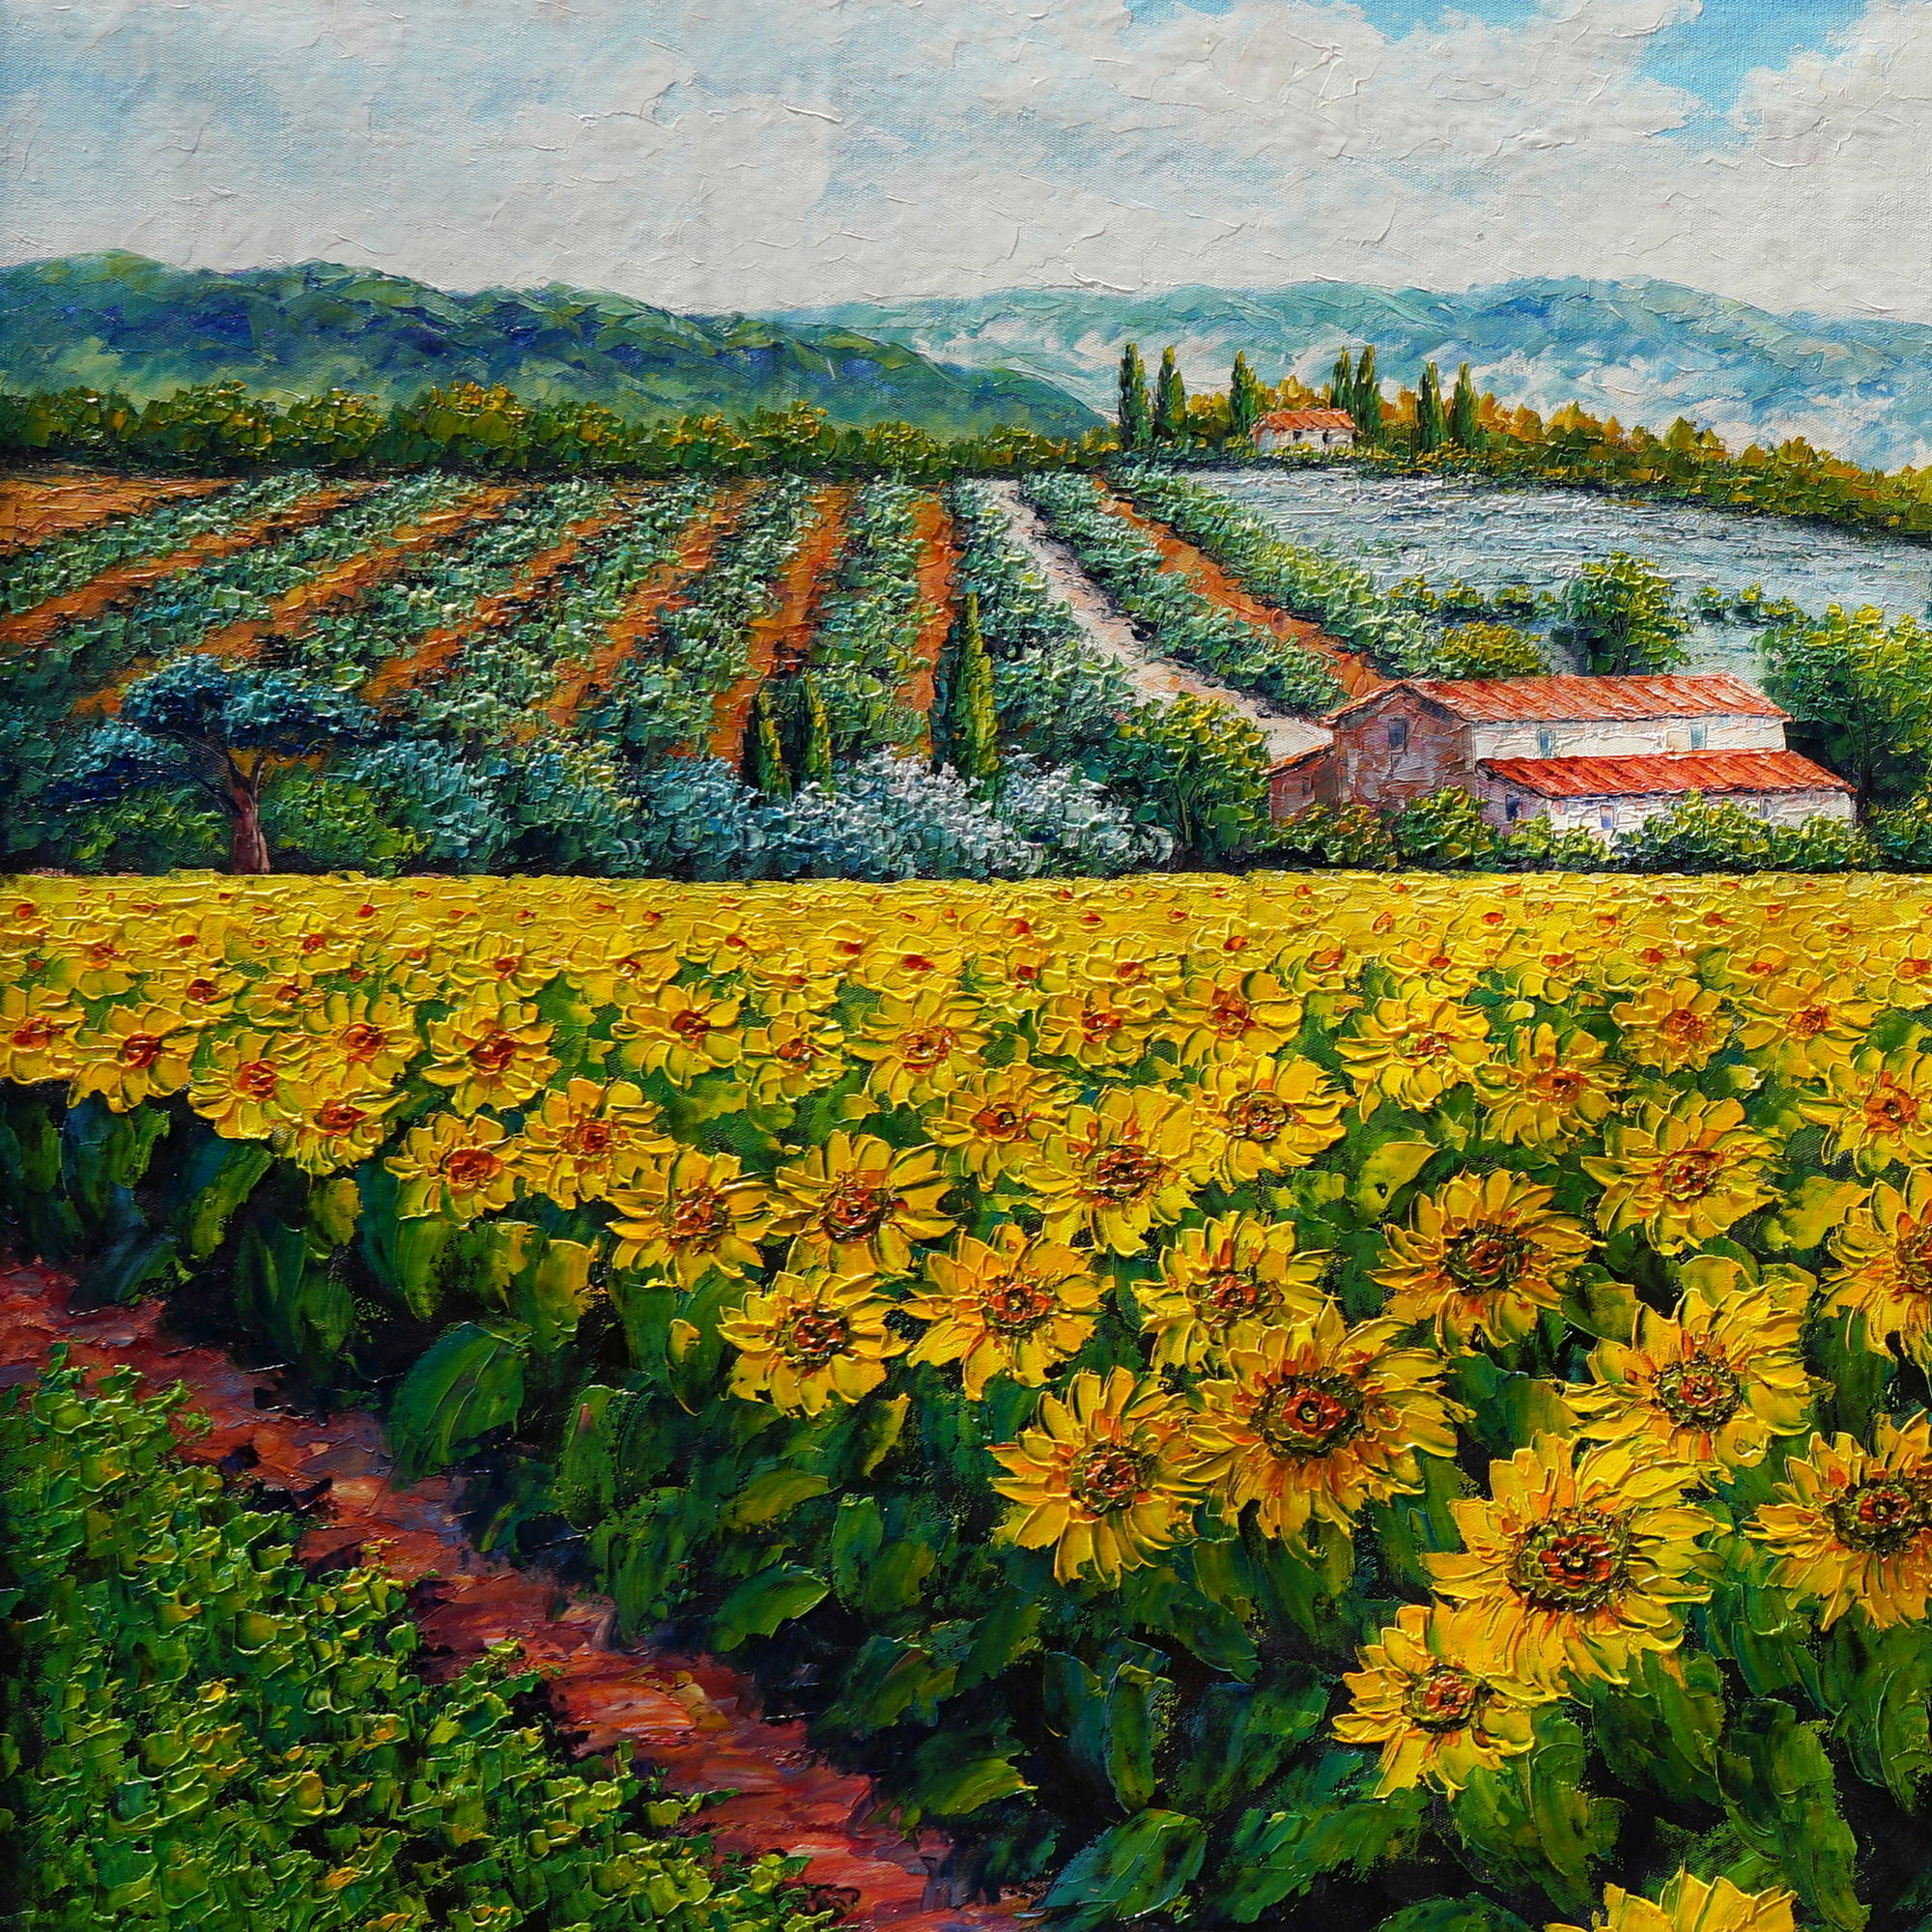 Hand painted Sunflower Fields and Seascape 90x180cm